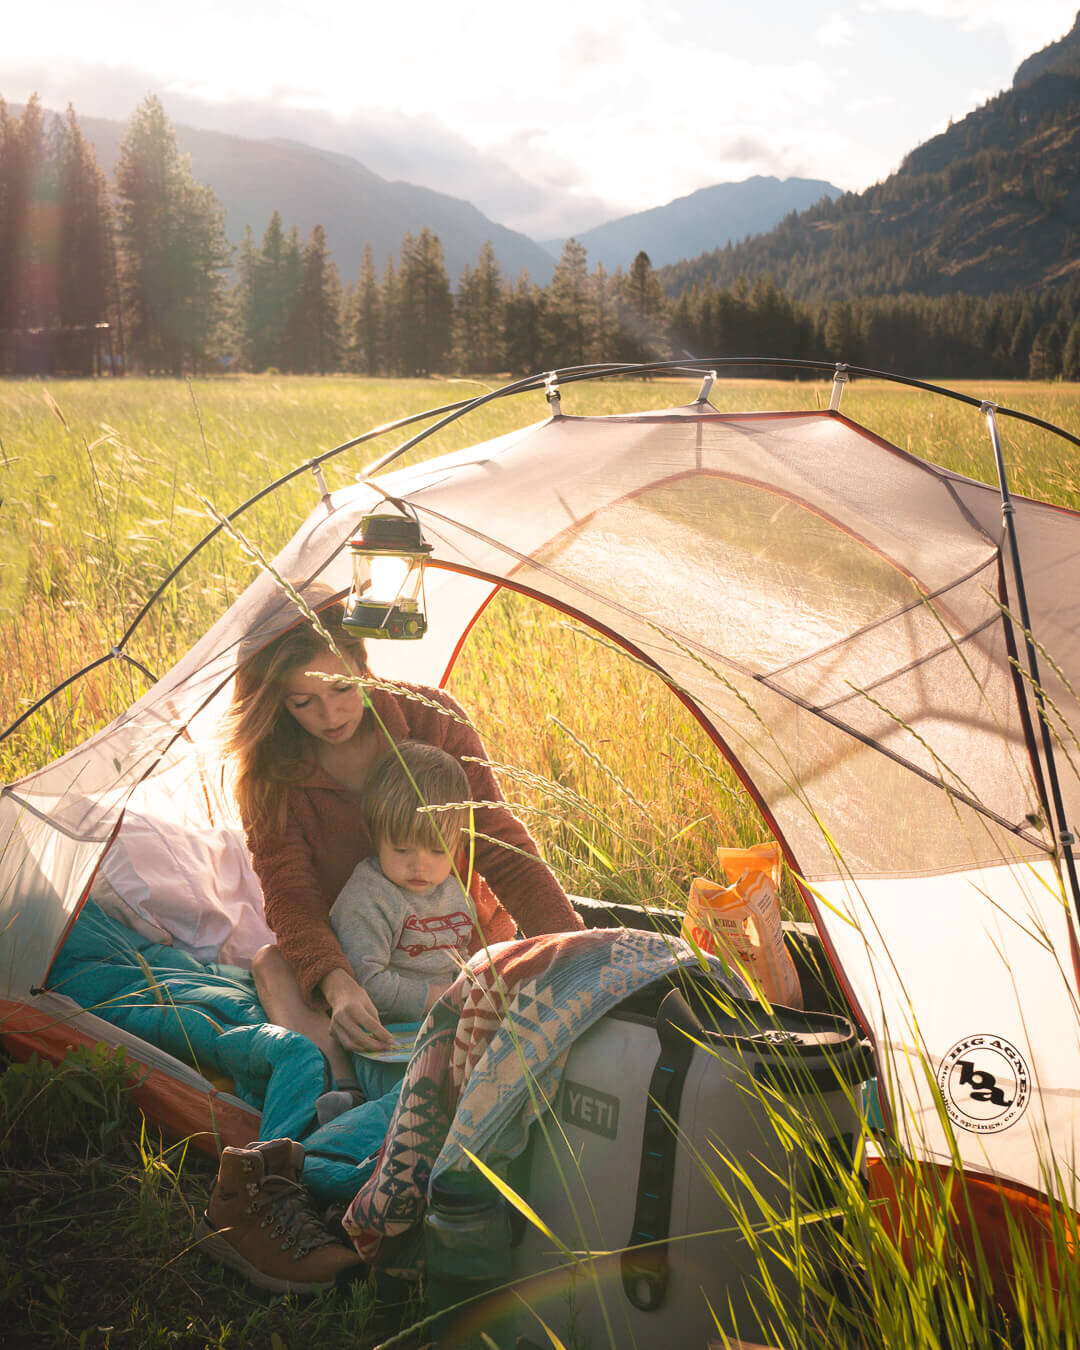 Big Agnes: Camping Essentials that Can't be Beaten